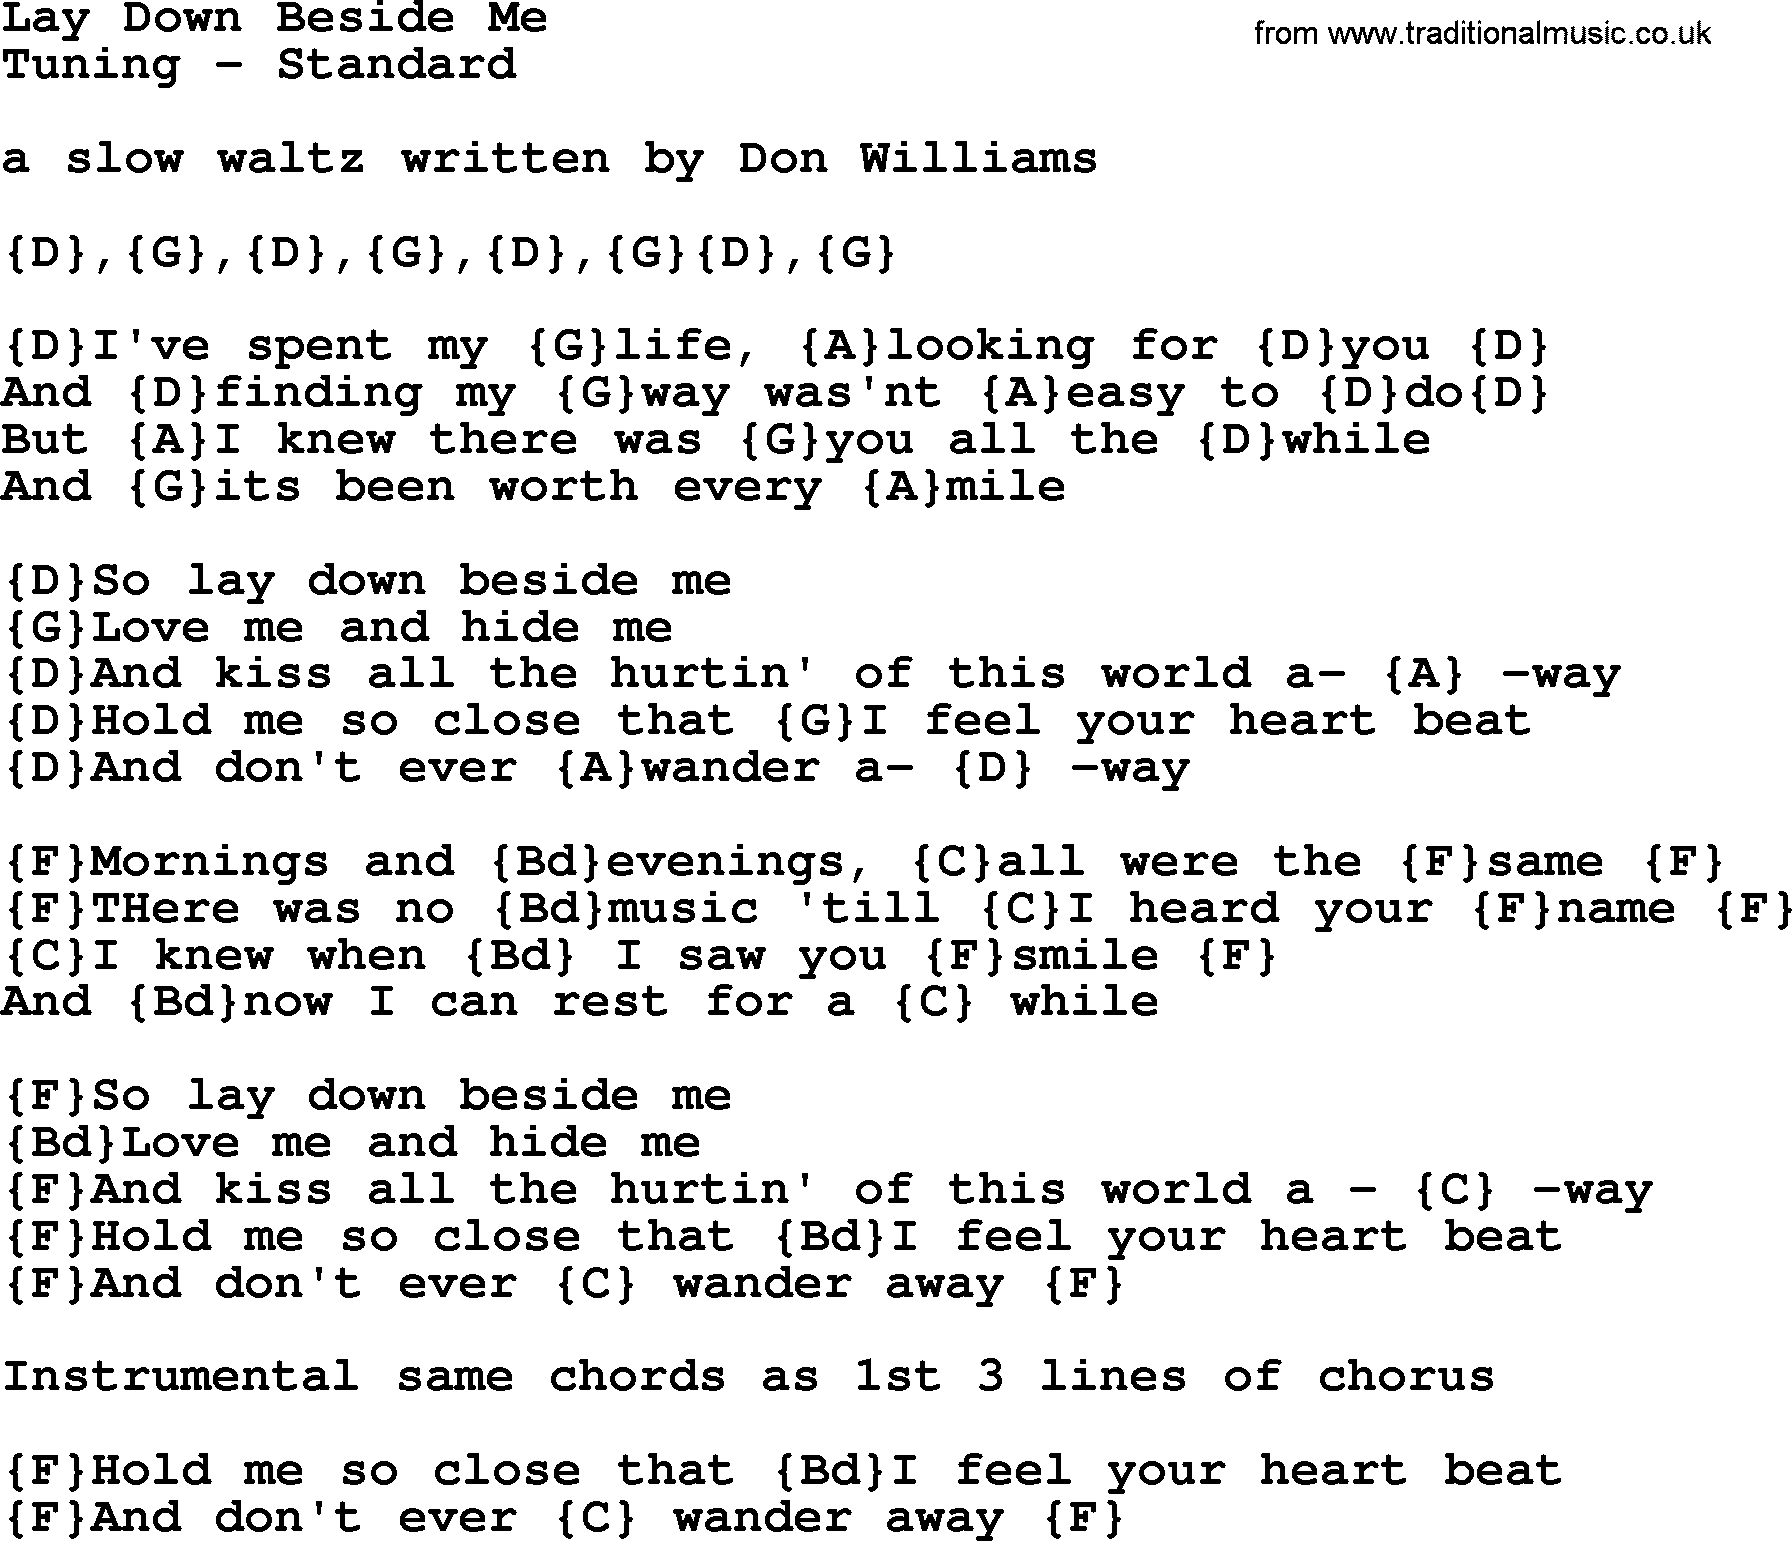 Bluegrass song: Lay Down Beside Me, lyrics and chords